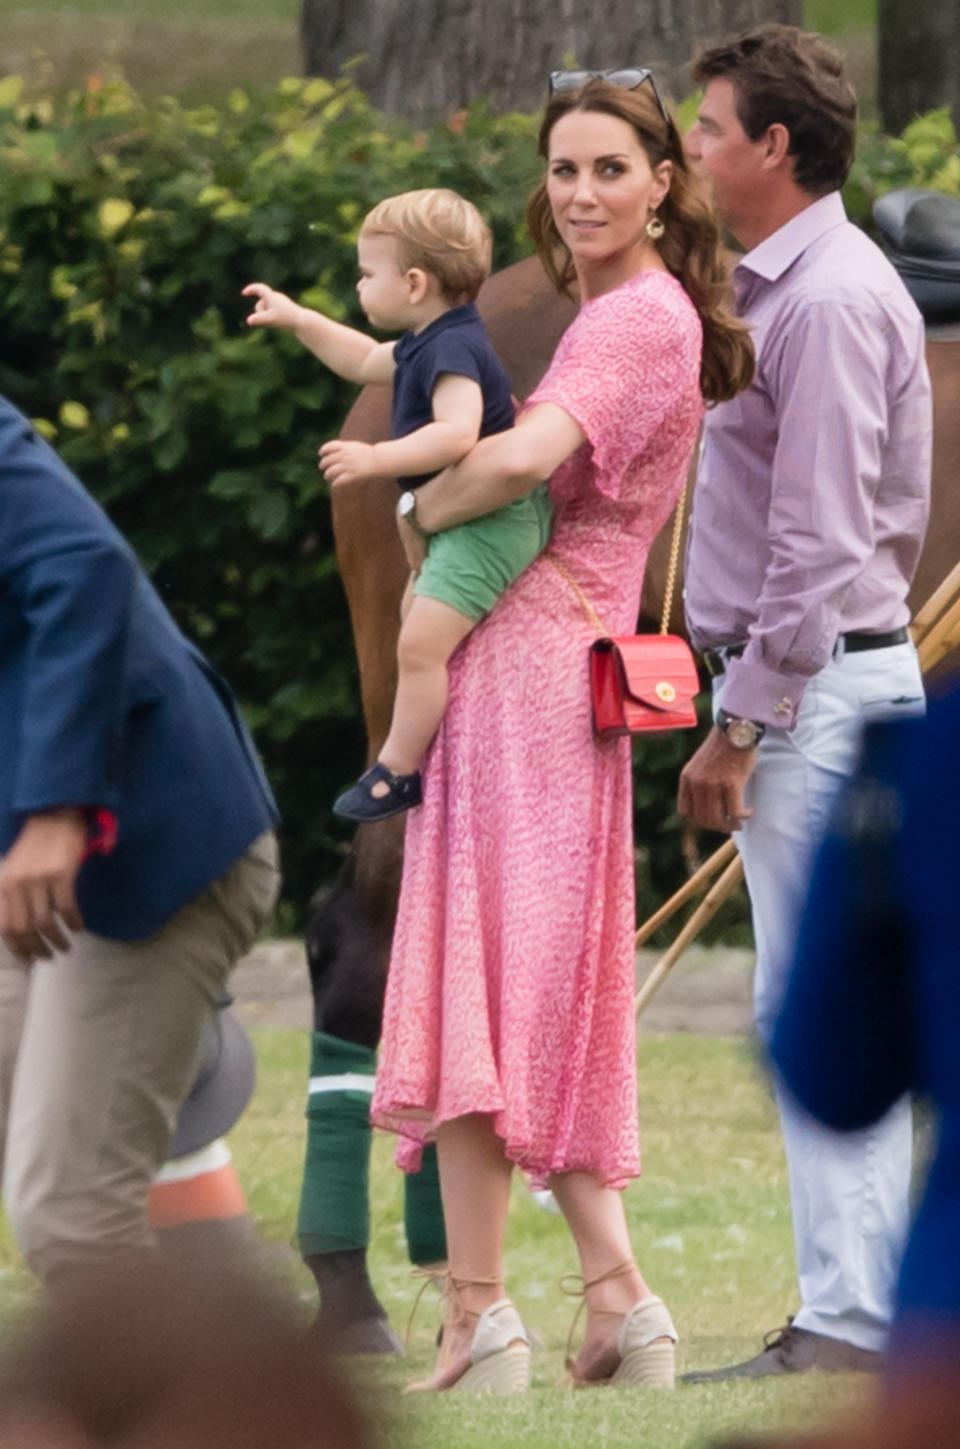 WOKINGHAM, ENGLAND - JULY 10: Catherine, Duchess of Cambridge and Prince Louis attend The King Power Royal Charity Polo Day at Billingbear Polo Club on July 10, 2019 in Wokingham, England. (Photo by Samir Hussein/WireImage)